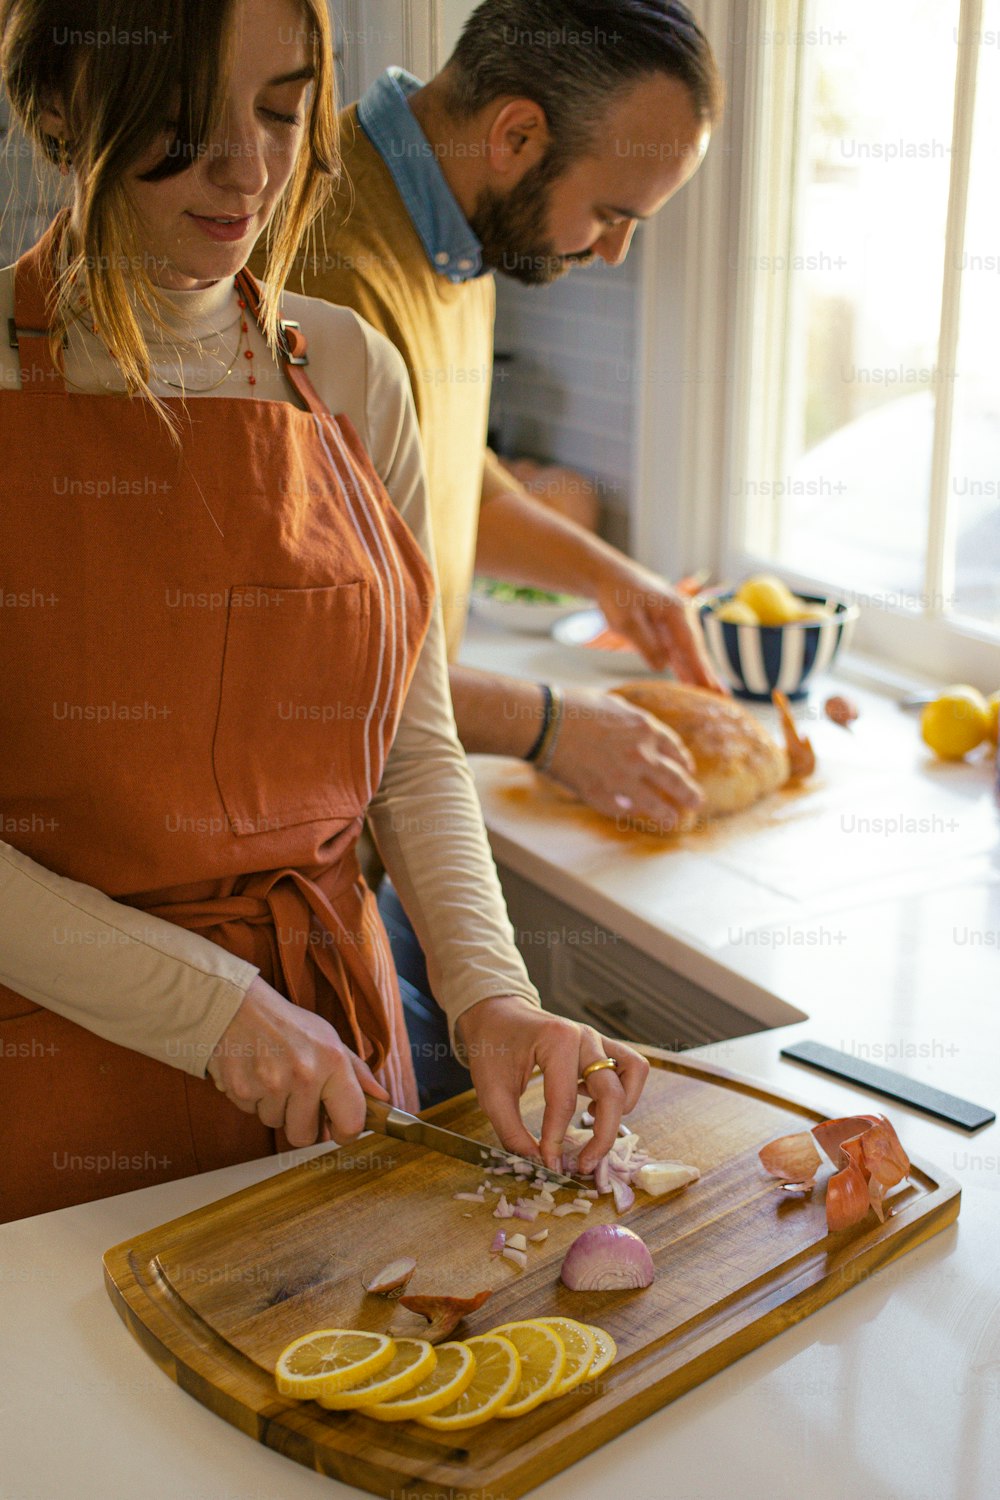 a man and a woman are preparing food on a cutting board